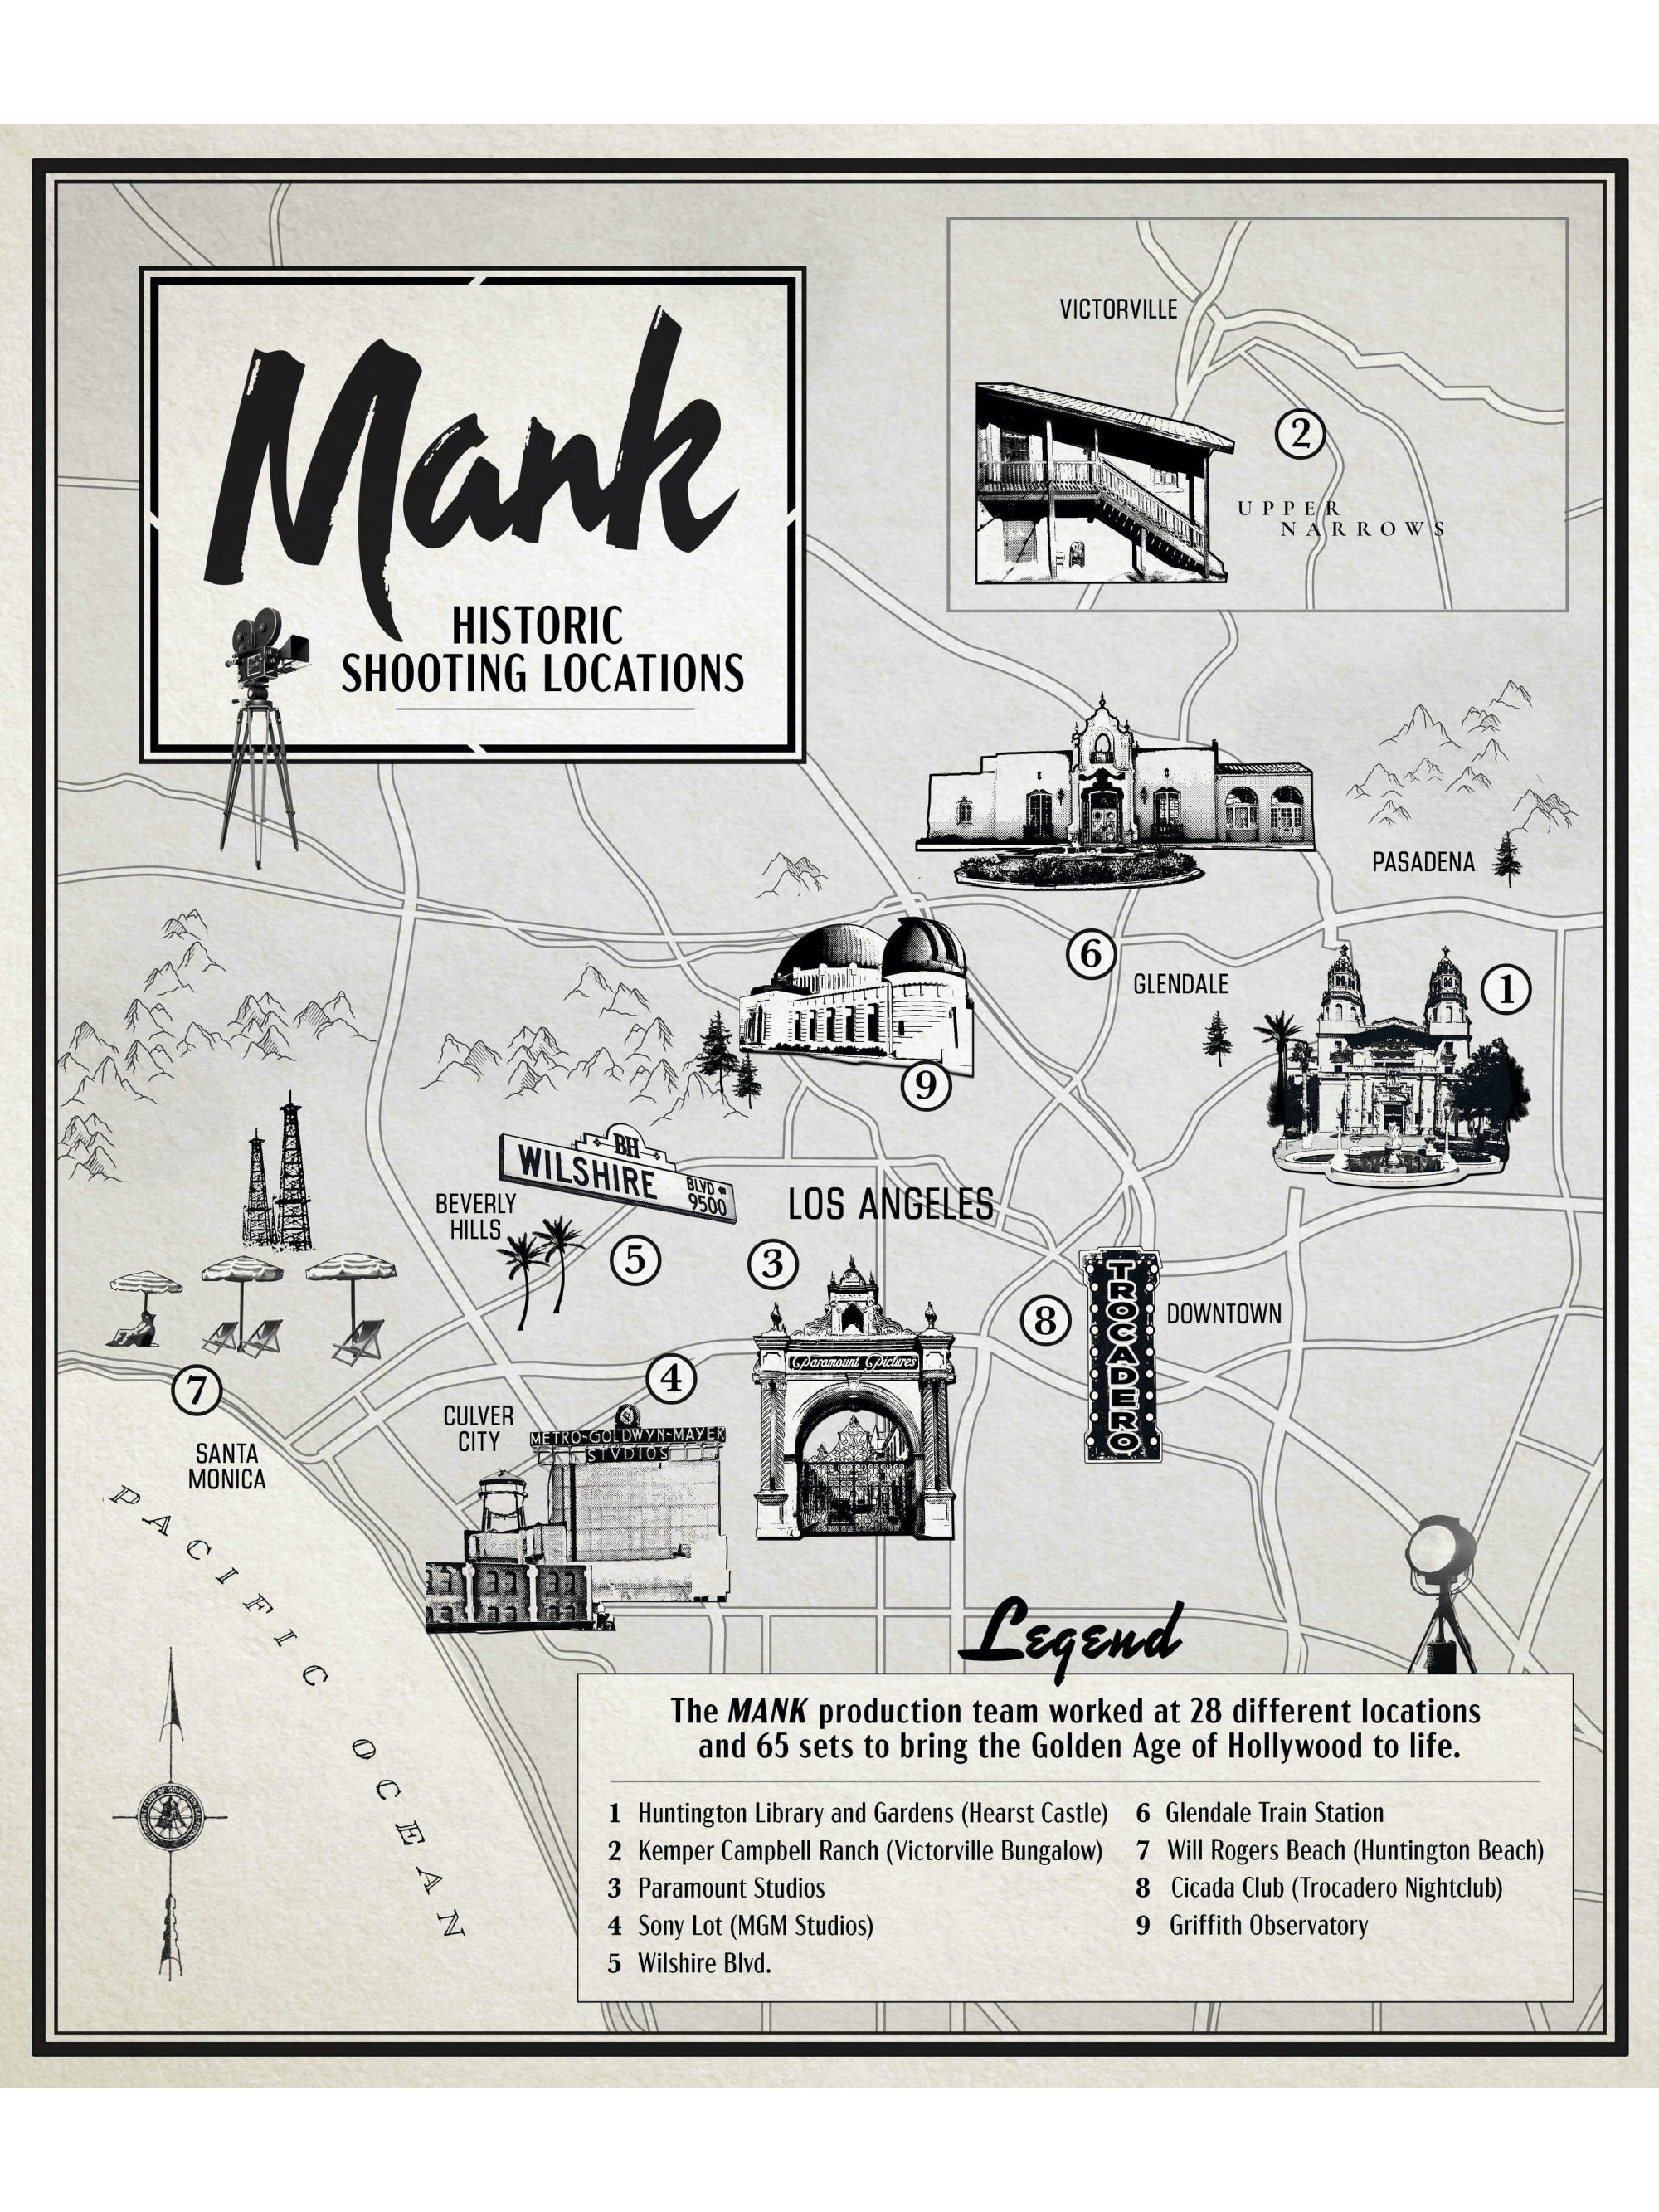 A sepia map of Mank’s historic shooting locations. The Legend reads: “The Mank team worked at 28 different locations and 65 sets to bring the Golden Age of Hollywood to life.” Pictured along the map are the Huntington Library and Gardens (standing in for Hearst Castle); Kemper Campbell Ranch (as the Victorville Bungalow); Paramount Studios; the Sony Lot (standing in for M-G-M Studios); Wilshire Boulevard; Glendale Train Station; Will Rogers Beach (standing in for Huntington Beach); Cicada Club (as the Trocadero Nightclub); Griffith Observatory; and the Biltmore Hotel.